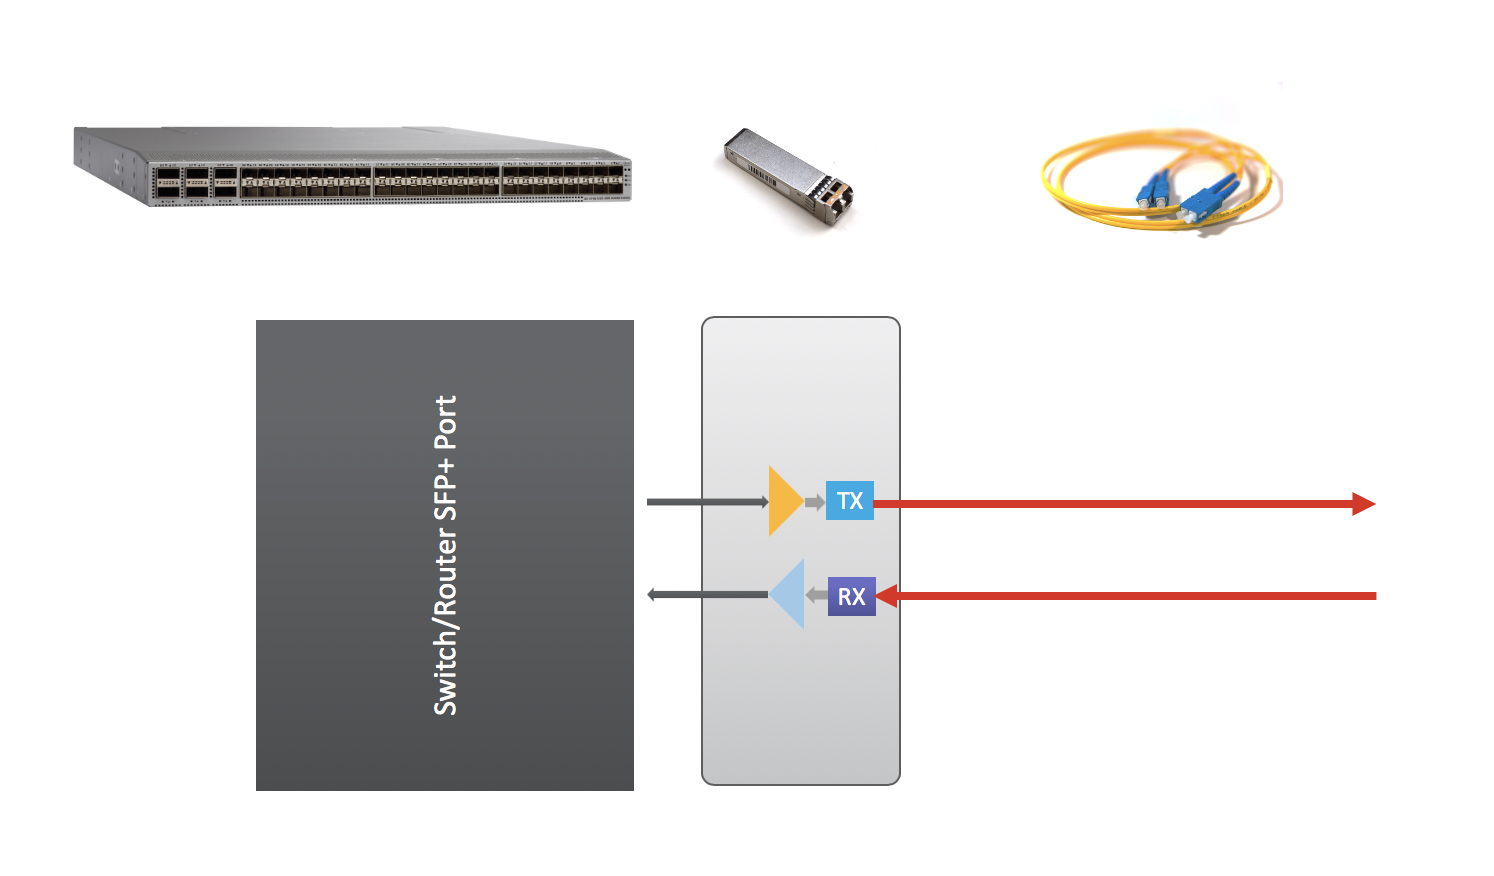 Figure 2. Block diagram and application of a typical 10G SFP+ pluggable transceiver module.